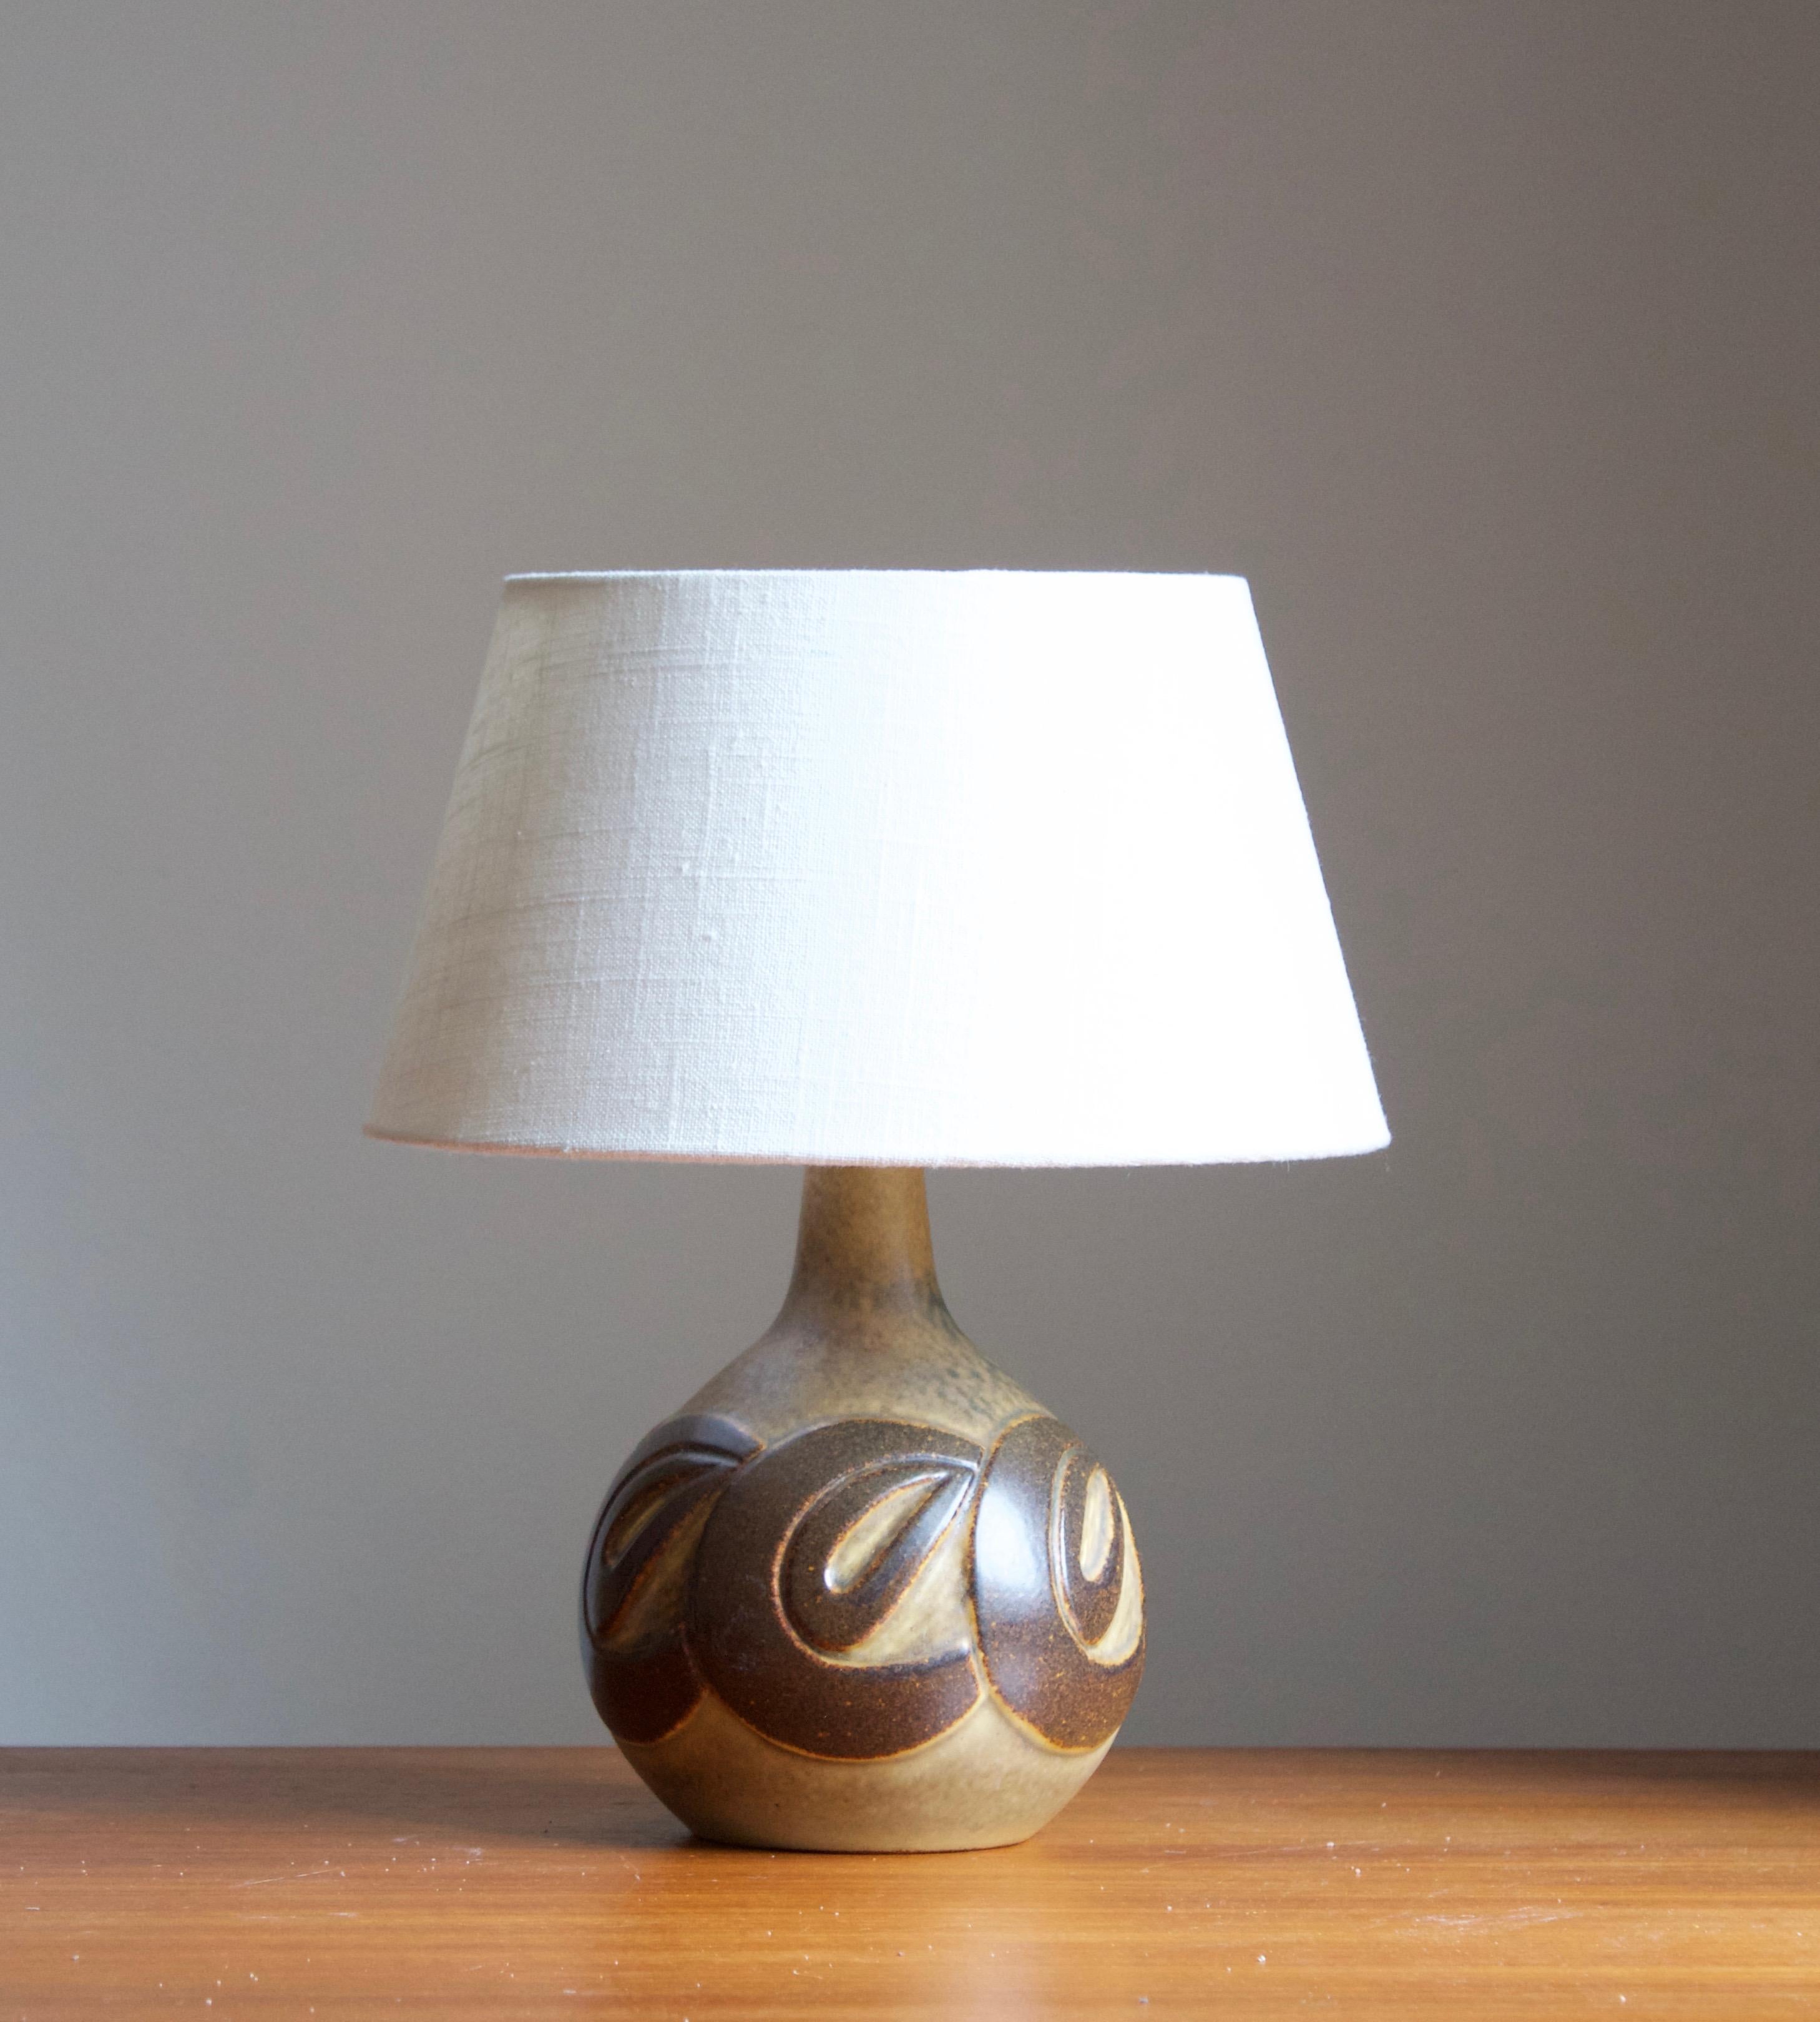 A table lamp produced by Michael Andersen Keramik. In stoneware. Marked.

Stated dimensions exclude lampshade. Height includes socket. Sold without lampshade.

Other ceramicists of the period include Axel Salto, Arne Bang, Carl-Harry Stålhane, and